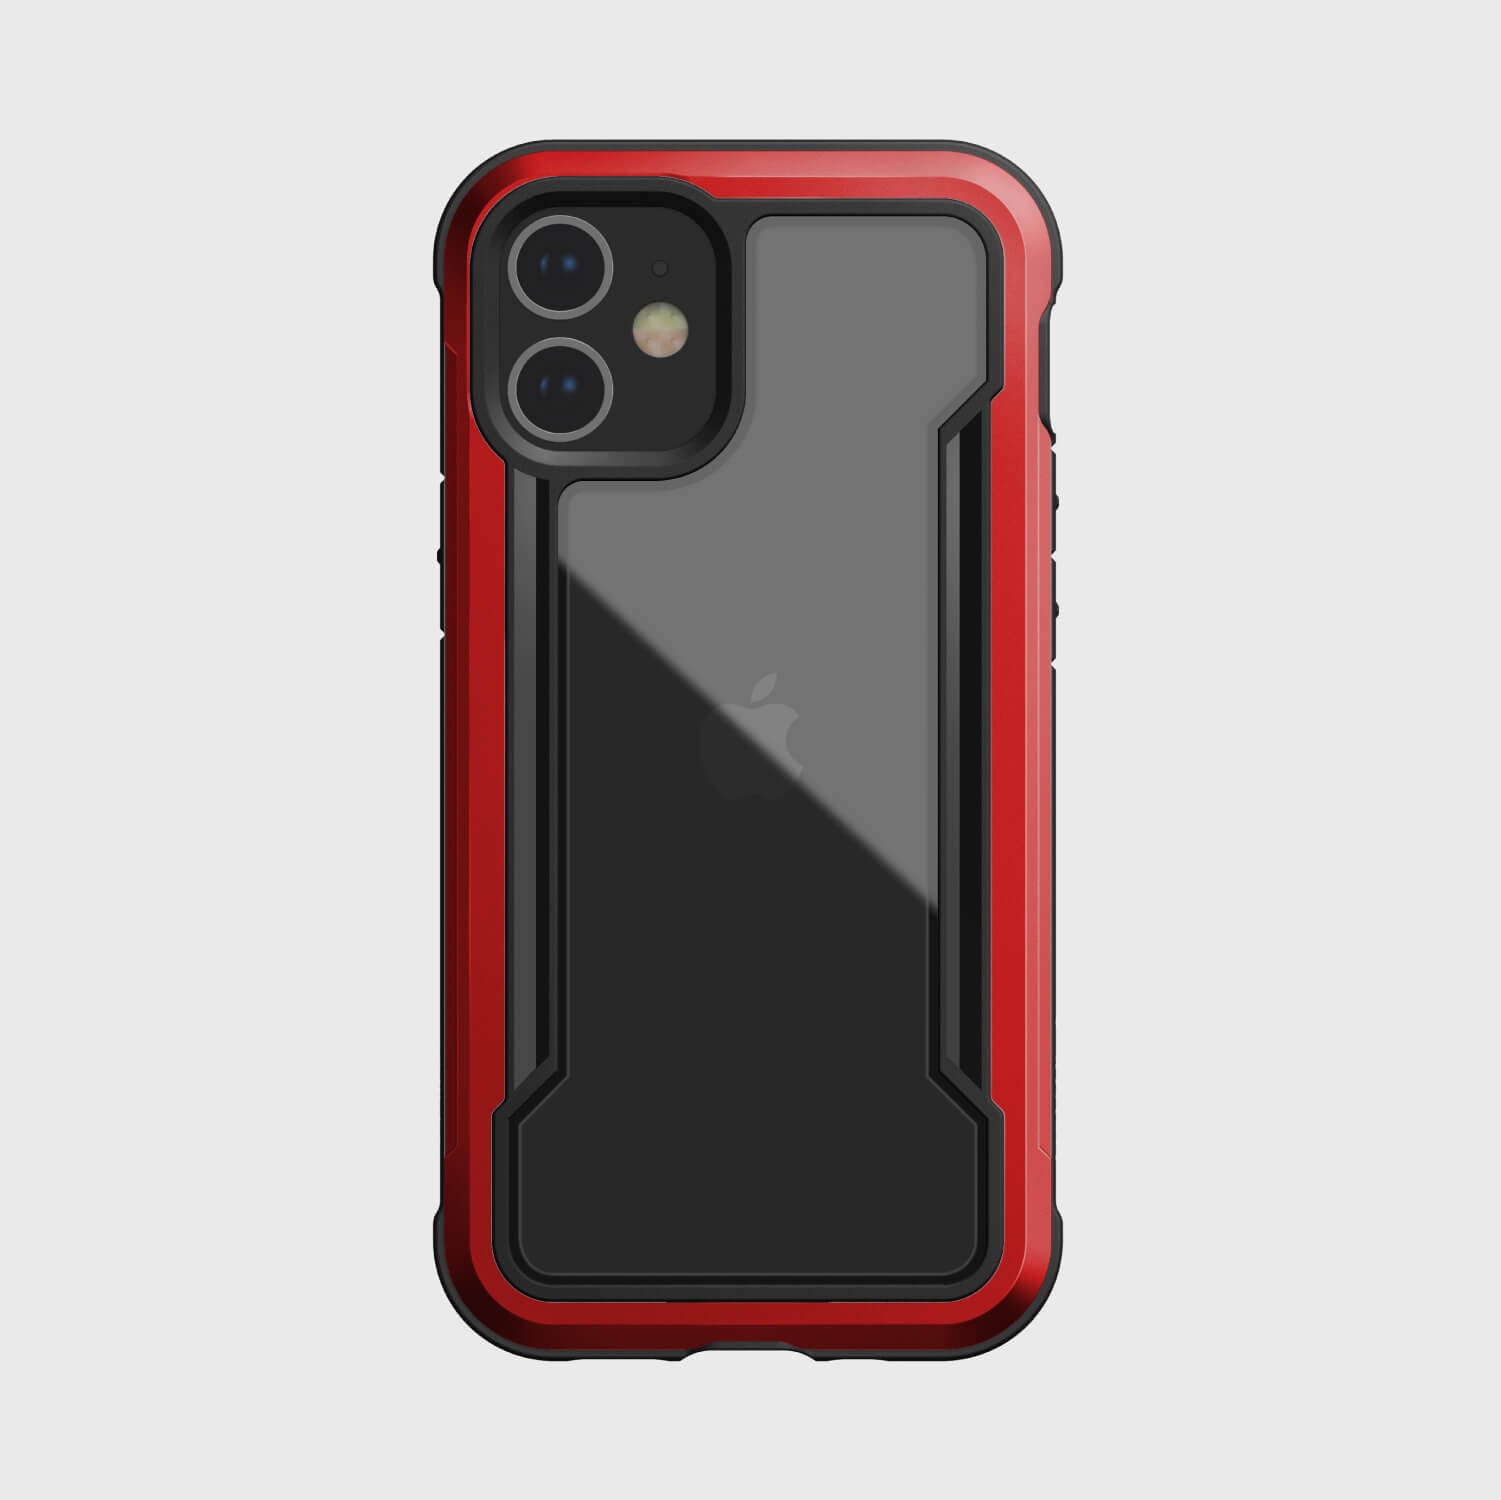 A red and black iPhone 12 Mini Case - SHIELD by Raptic.